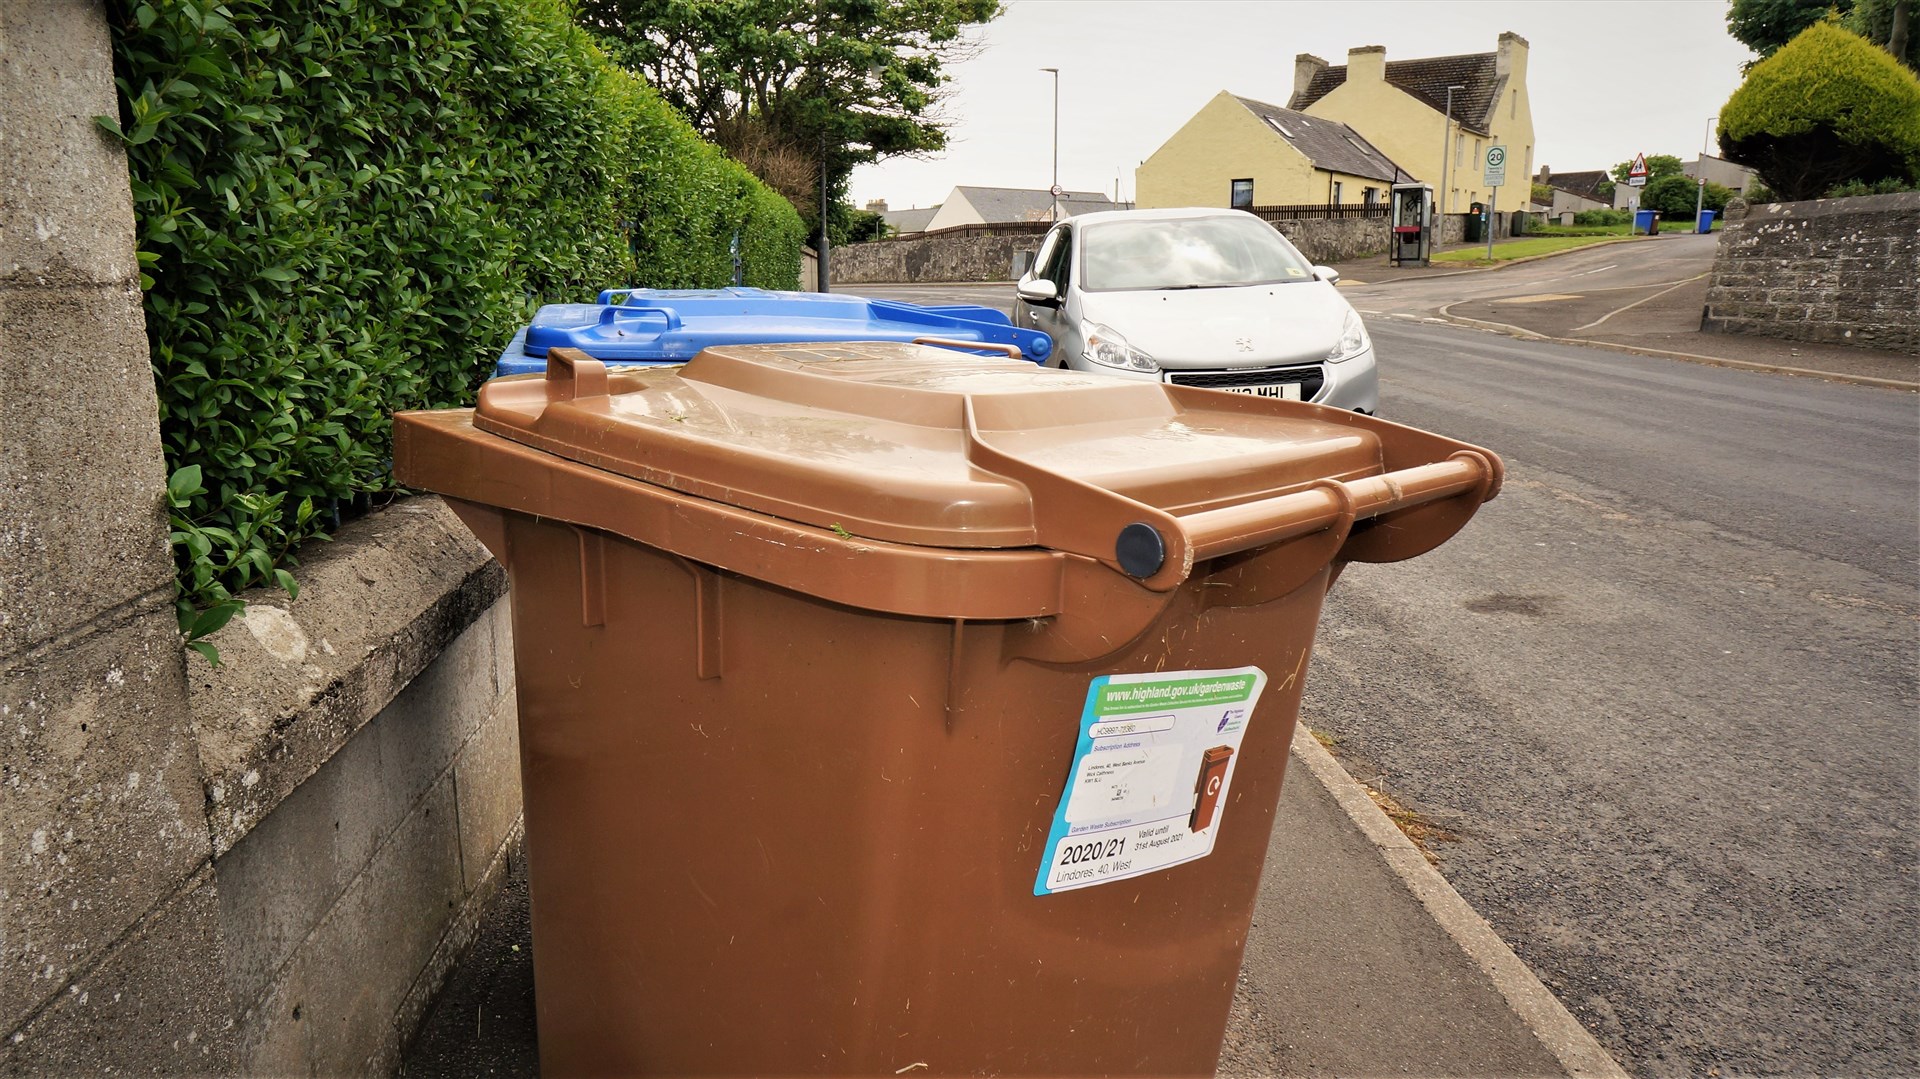 Householders must have a permit to get their brown bin lifted.